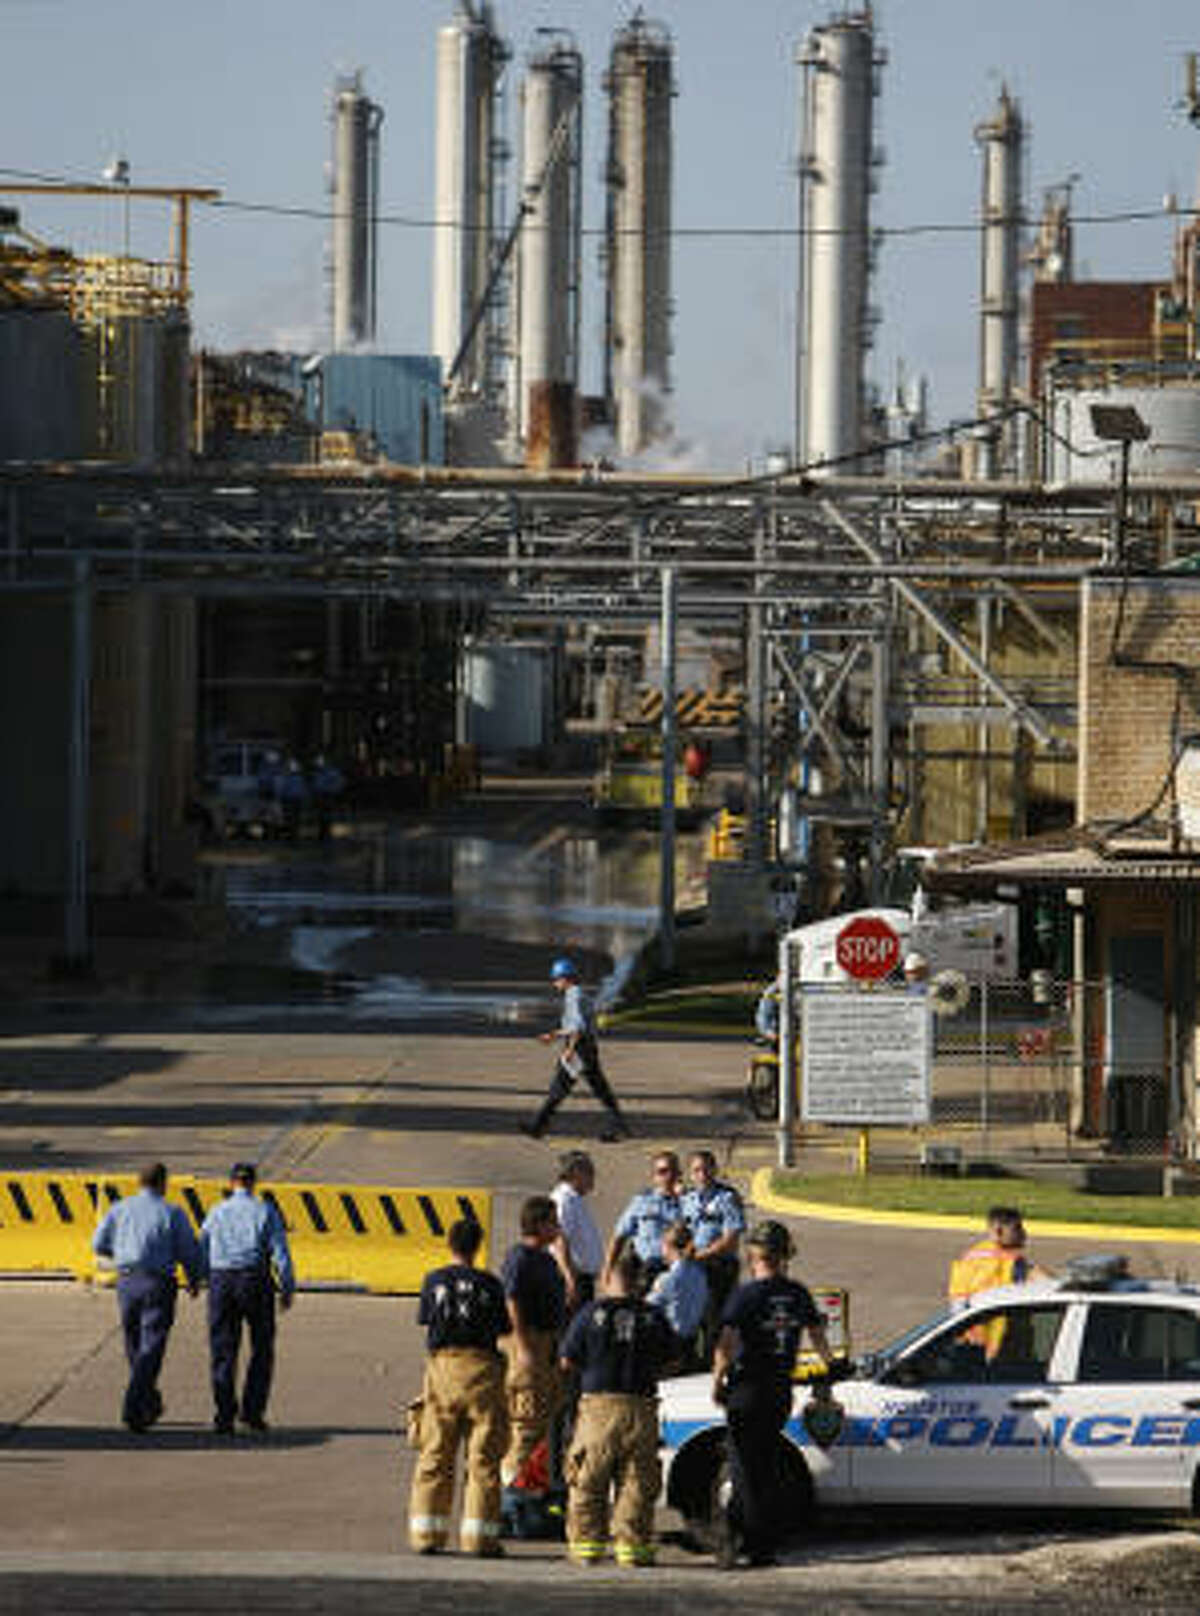 Firefighters and police responded at the Goodyear chemical plant in southeast Houston after a cooling unit exploded, injuring six workers and releasing ammonia fumes.